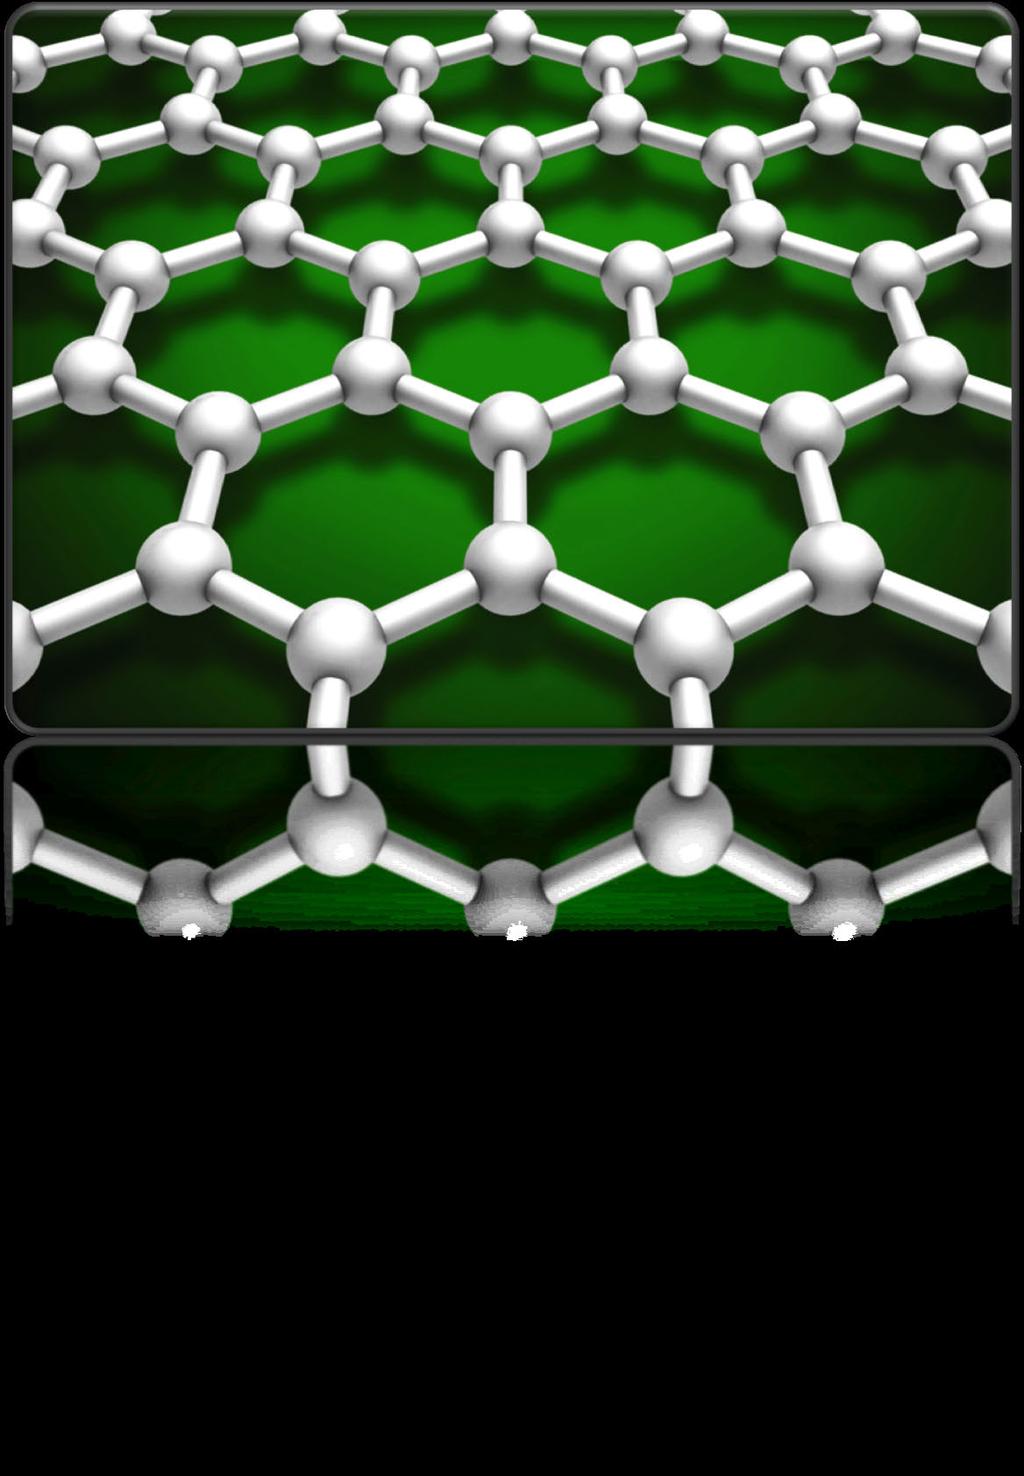 Graphene is the revolutionary miracle material that will forever change the